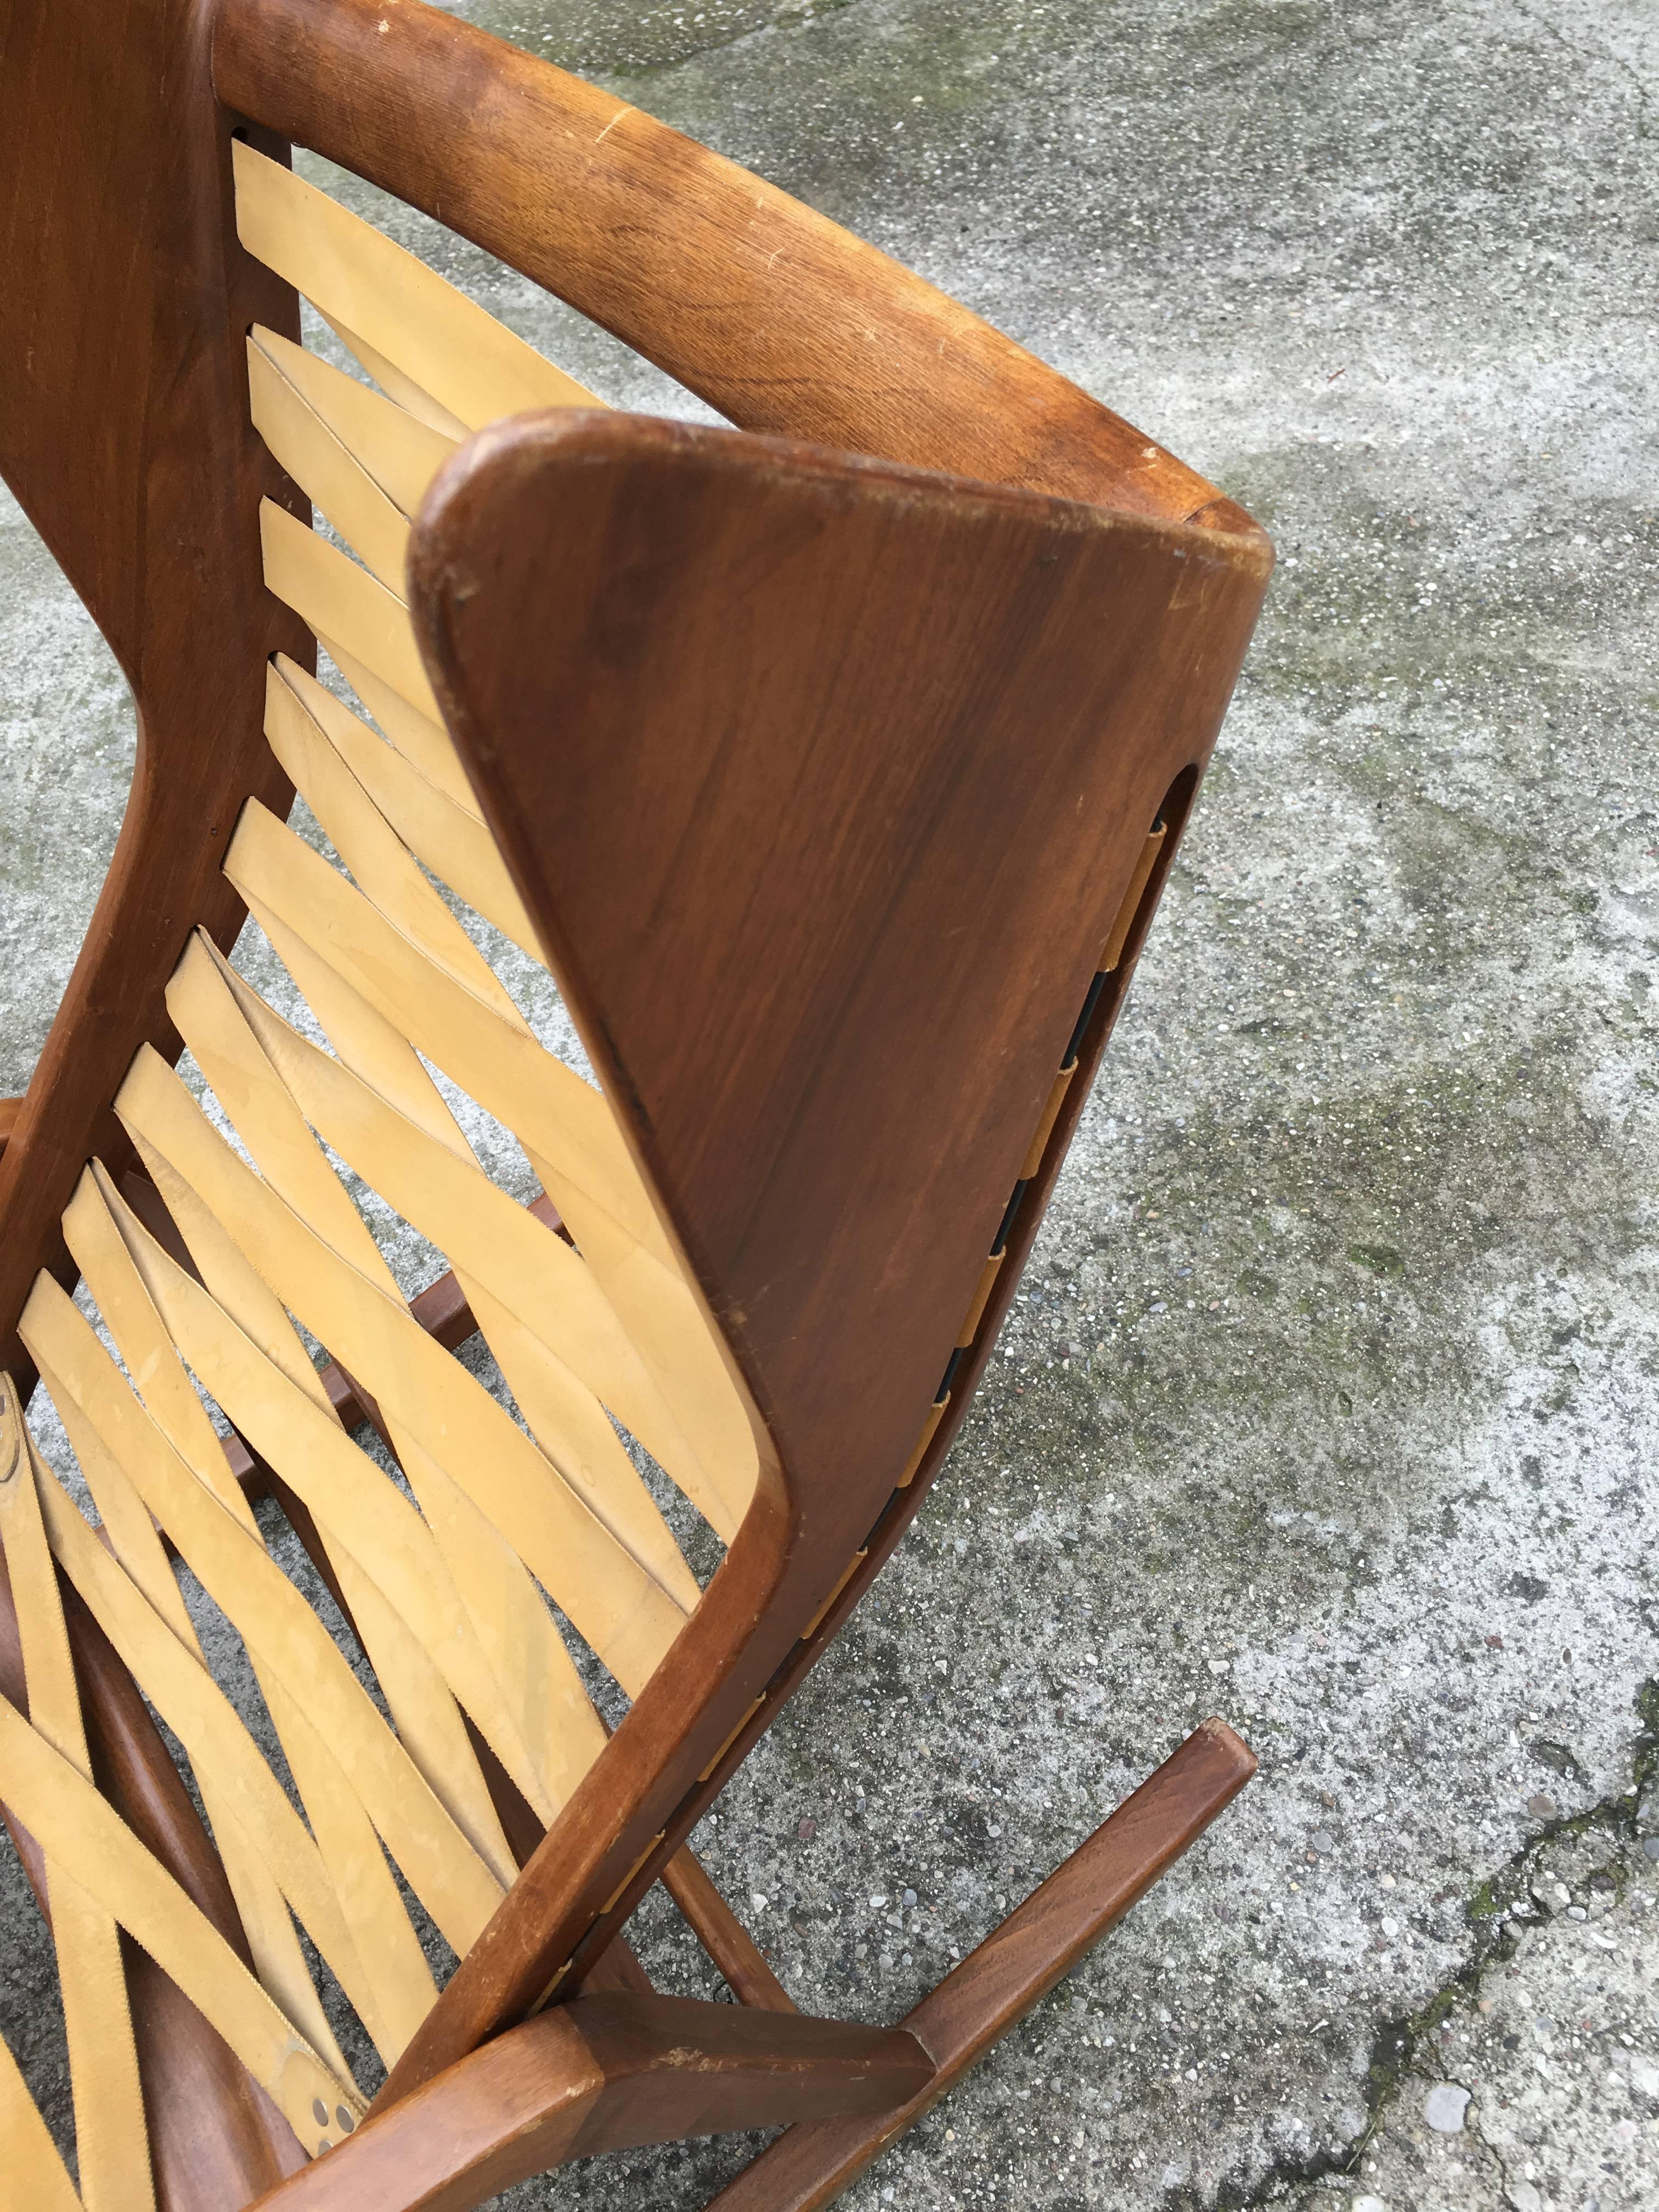 Rocking chair attributed by Gio Ponti. Manufactured by Cassina. The chair is made from walnut, fabric, elasticized banding and plastic. Literature: Irene de Guttry, Maria Paola Maino, Il mobile Italiano degli anni 1940 e 1950, Laterza, Bari, 1992,